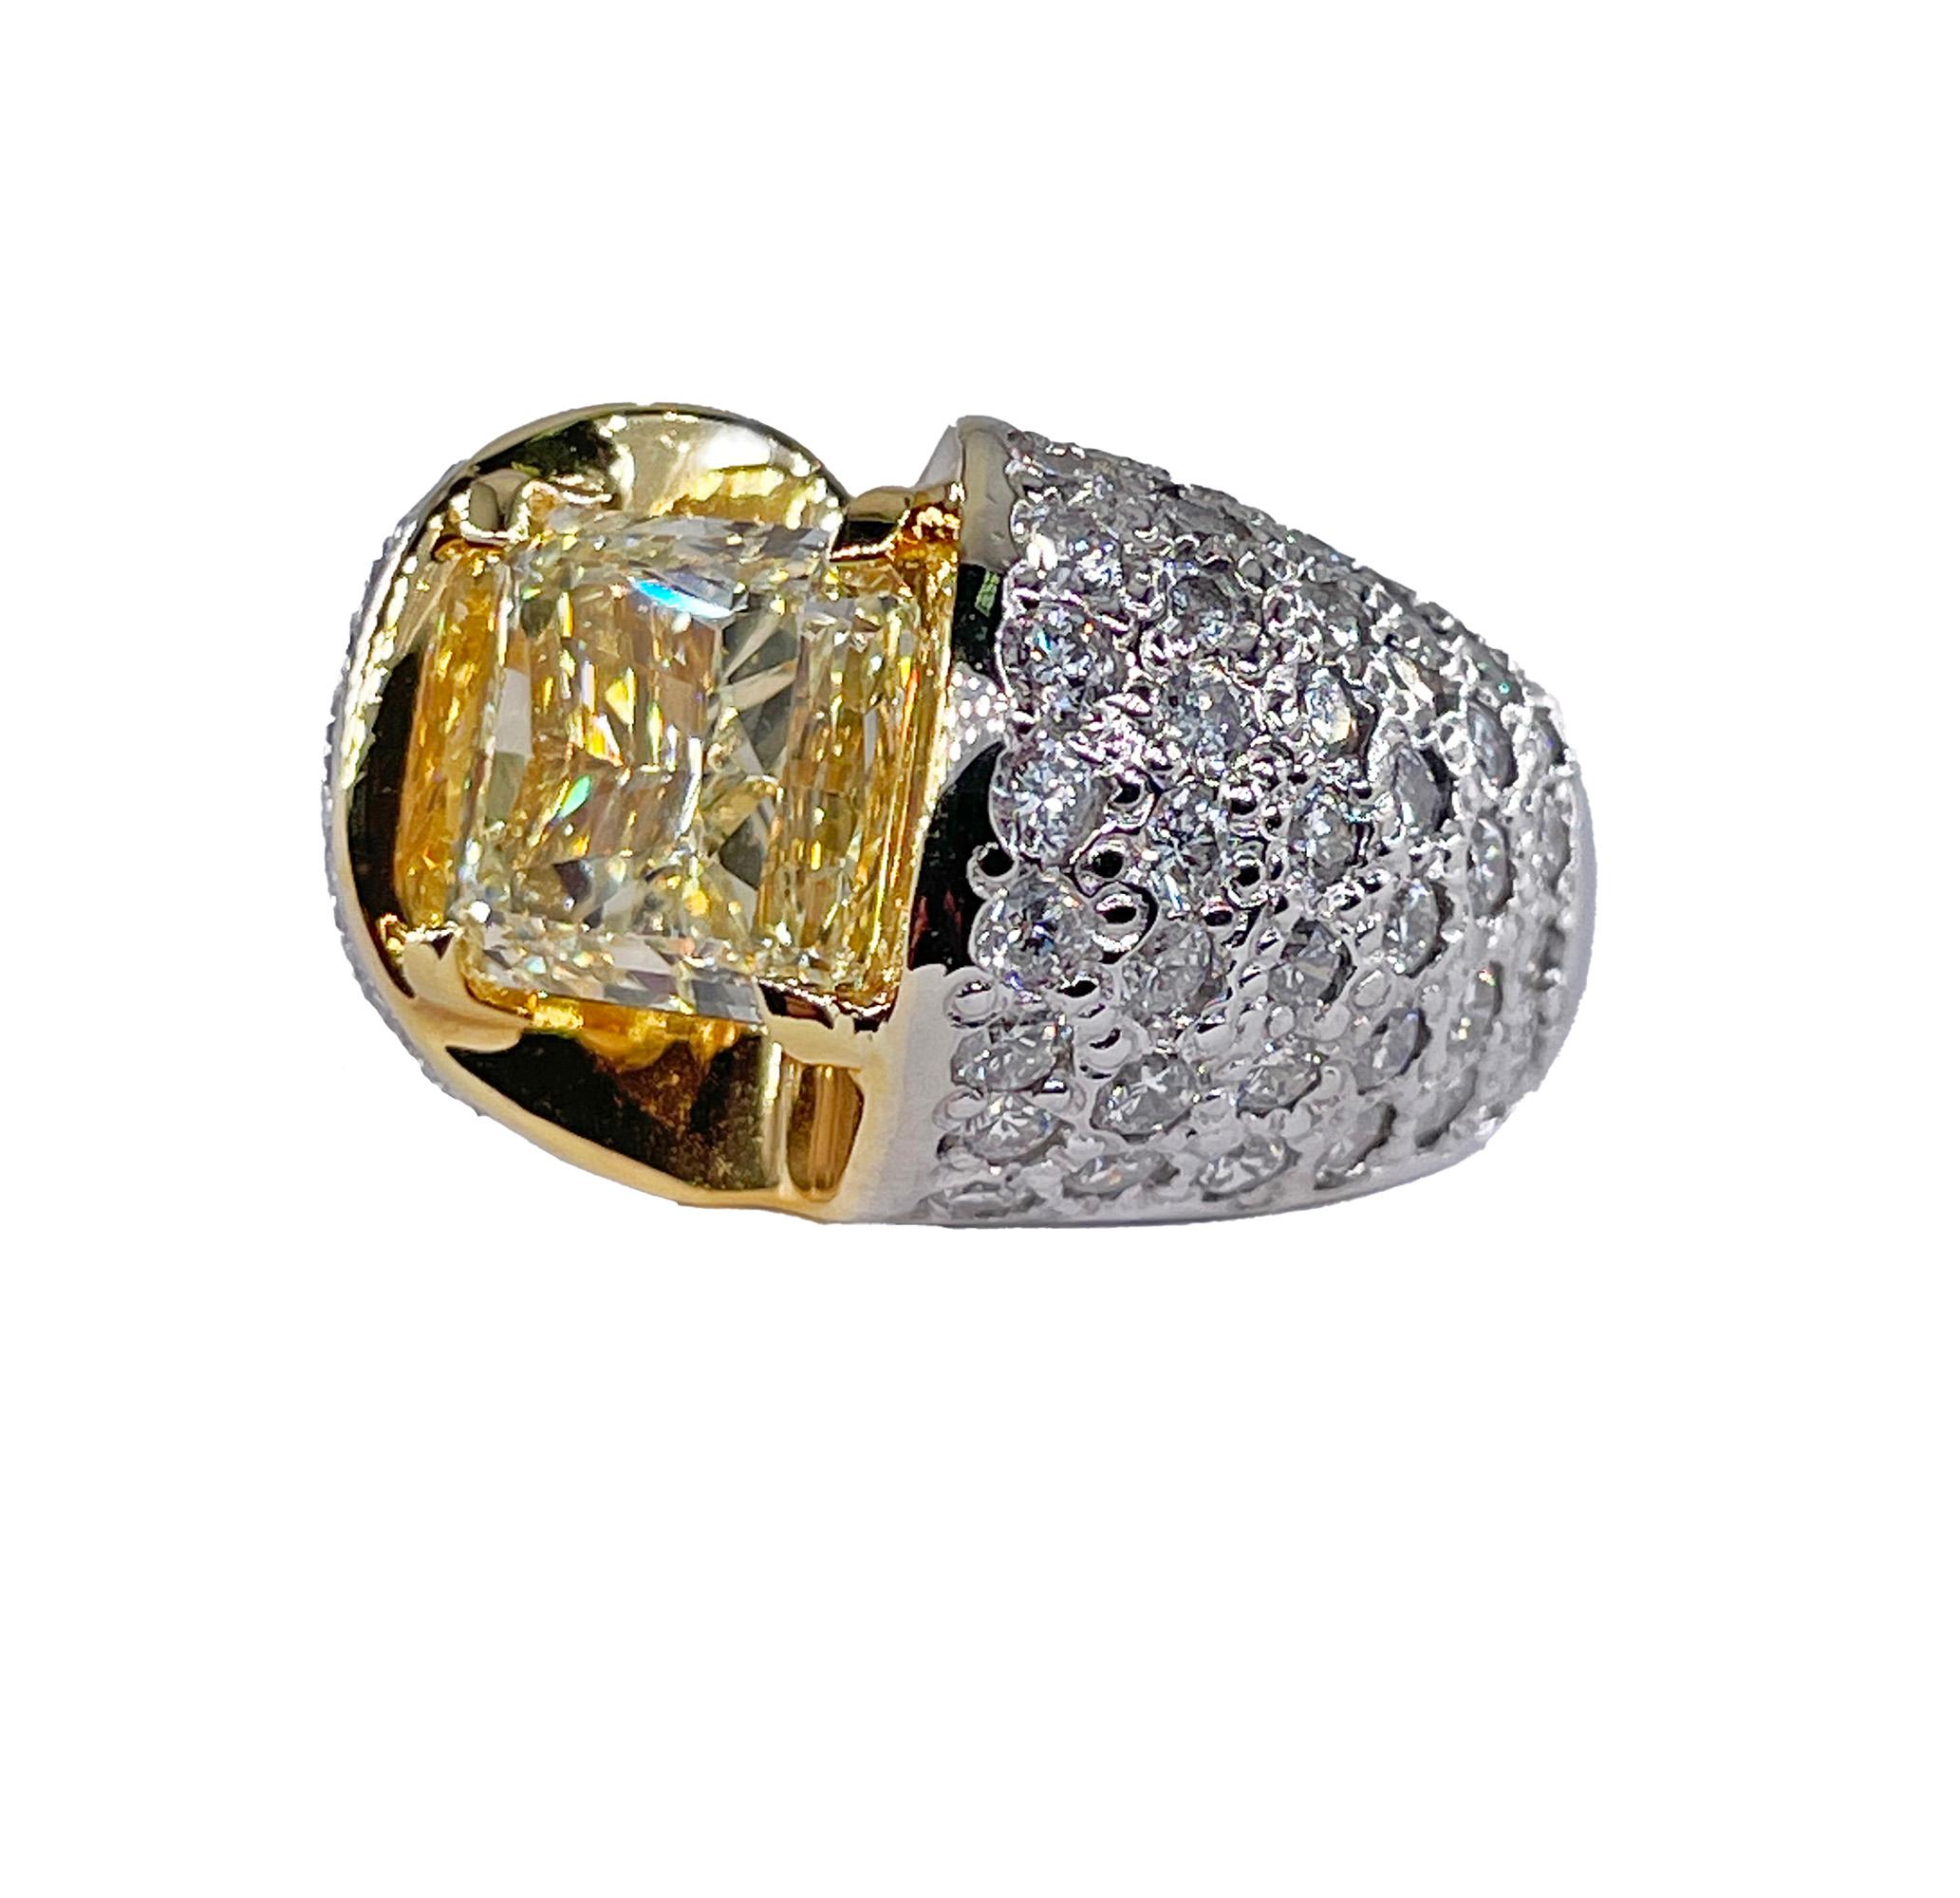 Vintage GIA “Canary” 7.02ctw Natural Fancy YELLOW Radiant Cut Diamond Dome Engagement Wedding Anniversary 18K Ring

Ready for something extraordinary?! This unique vintage high dome Ring is a statement maker!
A beams of sunshine radiate day and